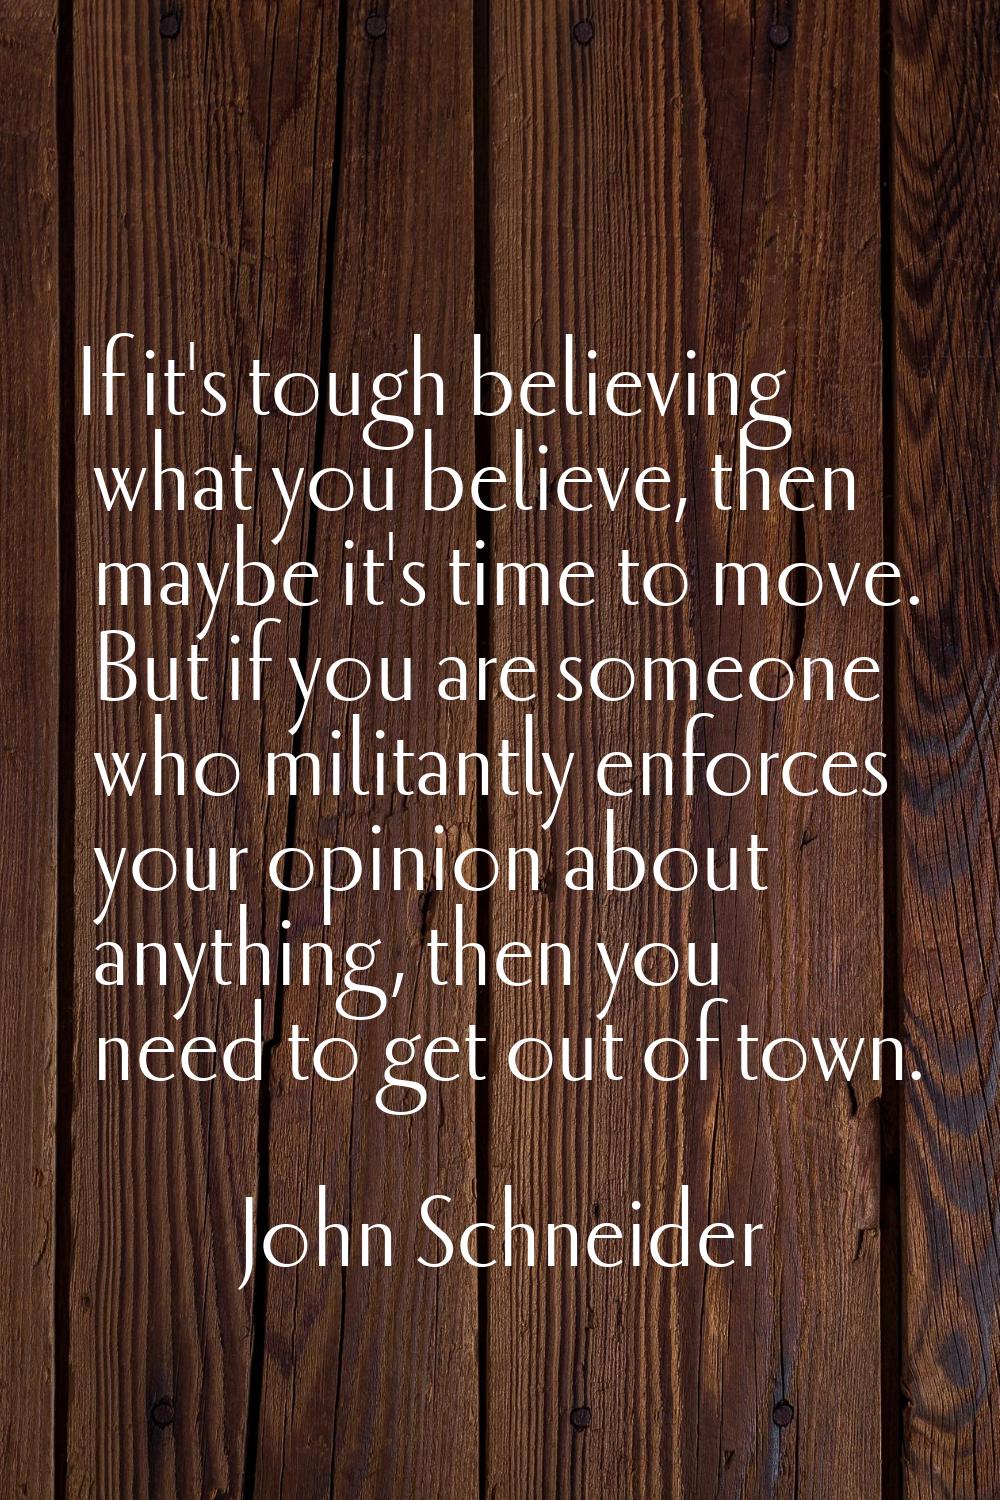 If it's tough believing what you believe, then maybe it's time to move. But if you are someone who 